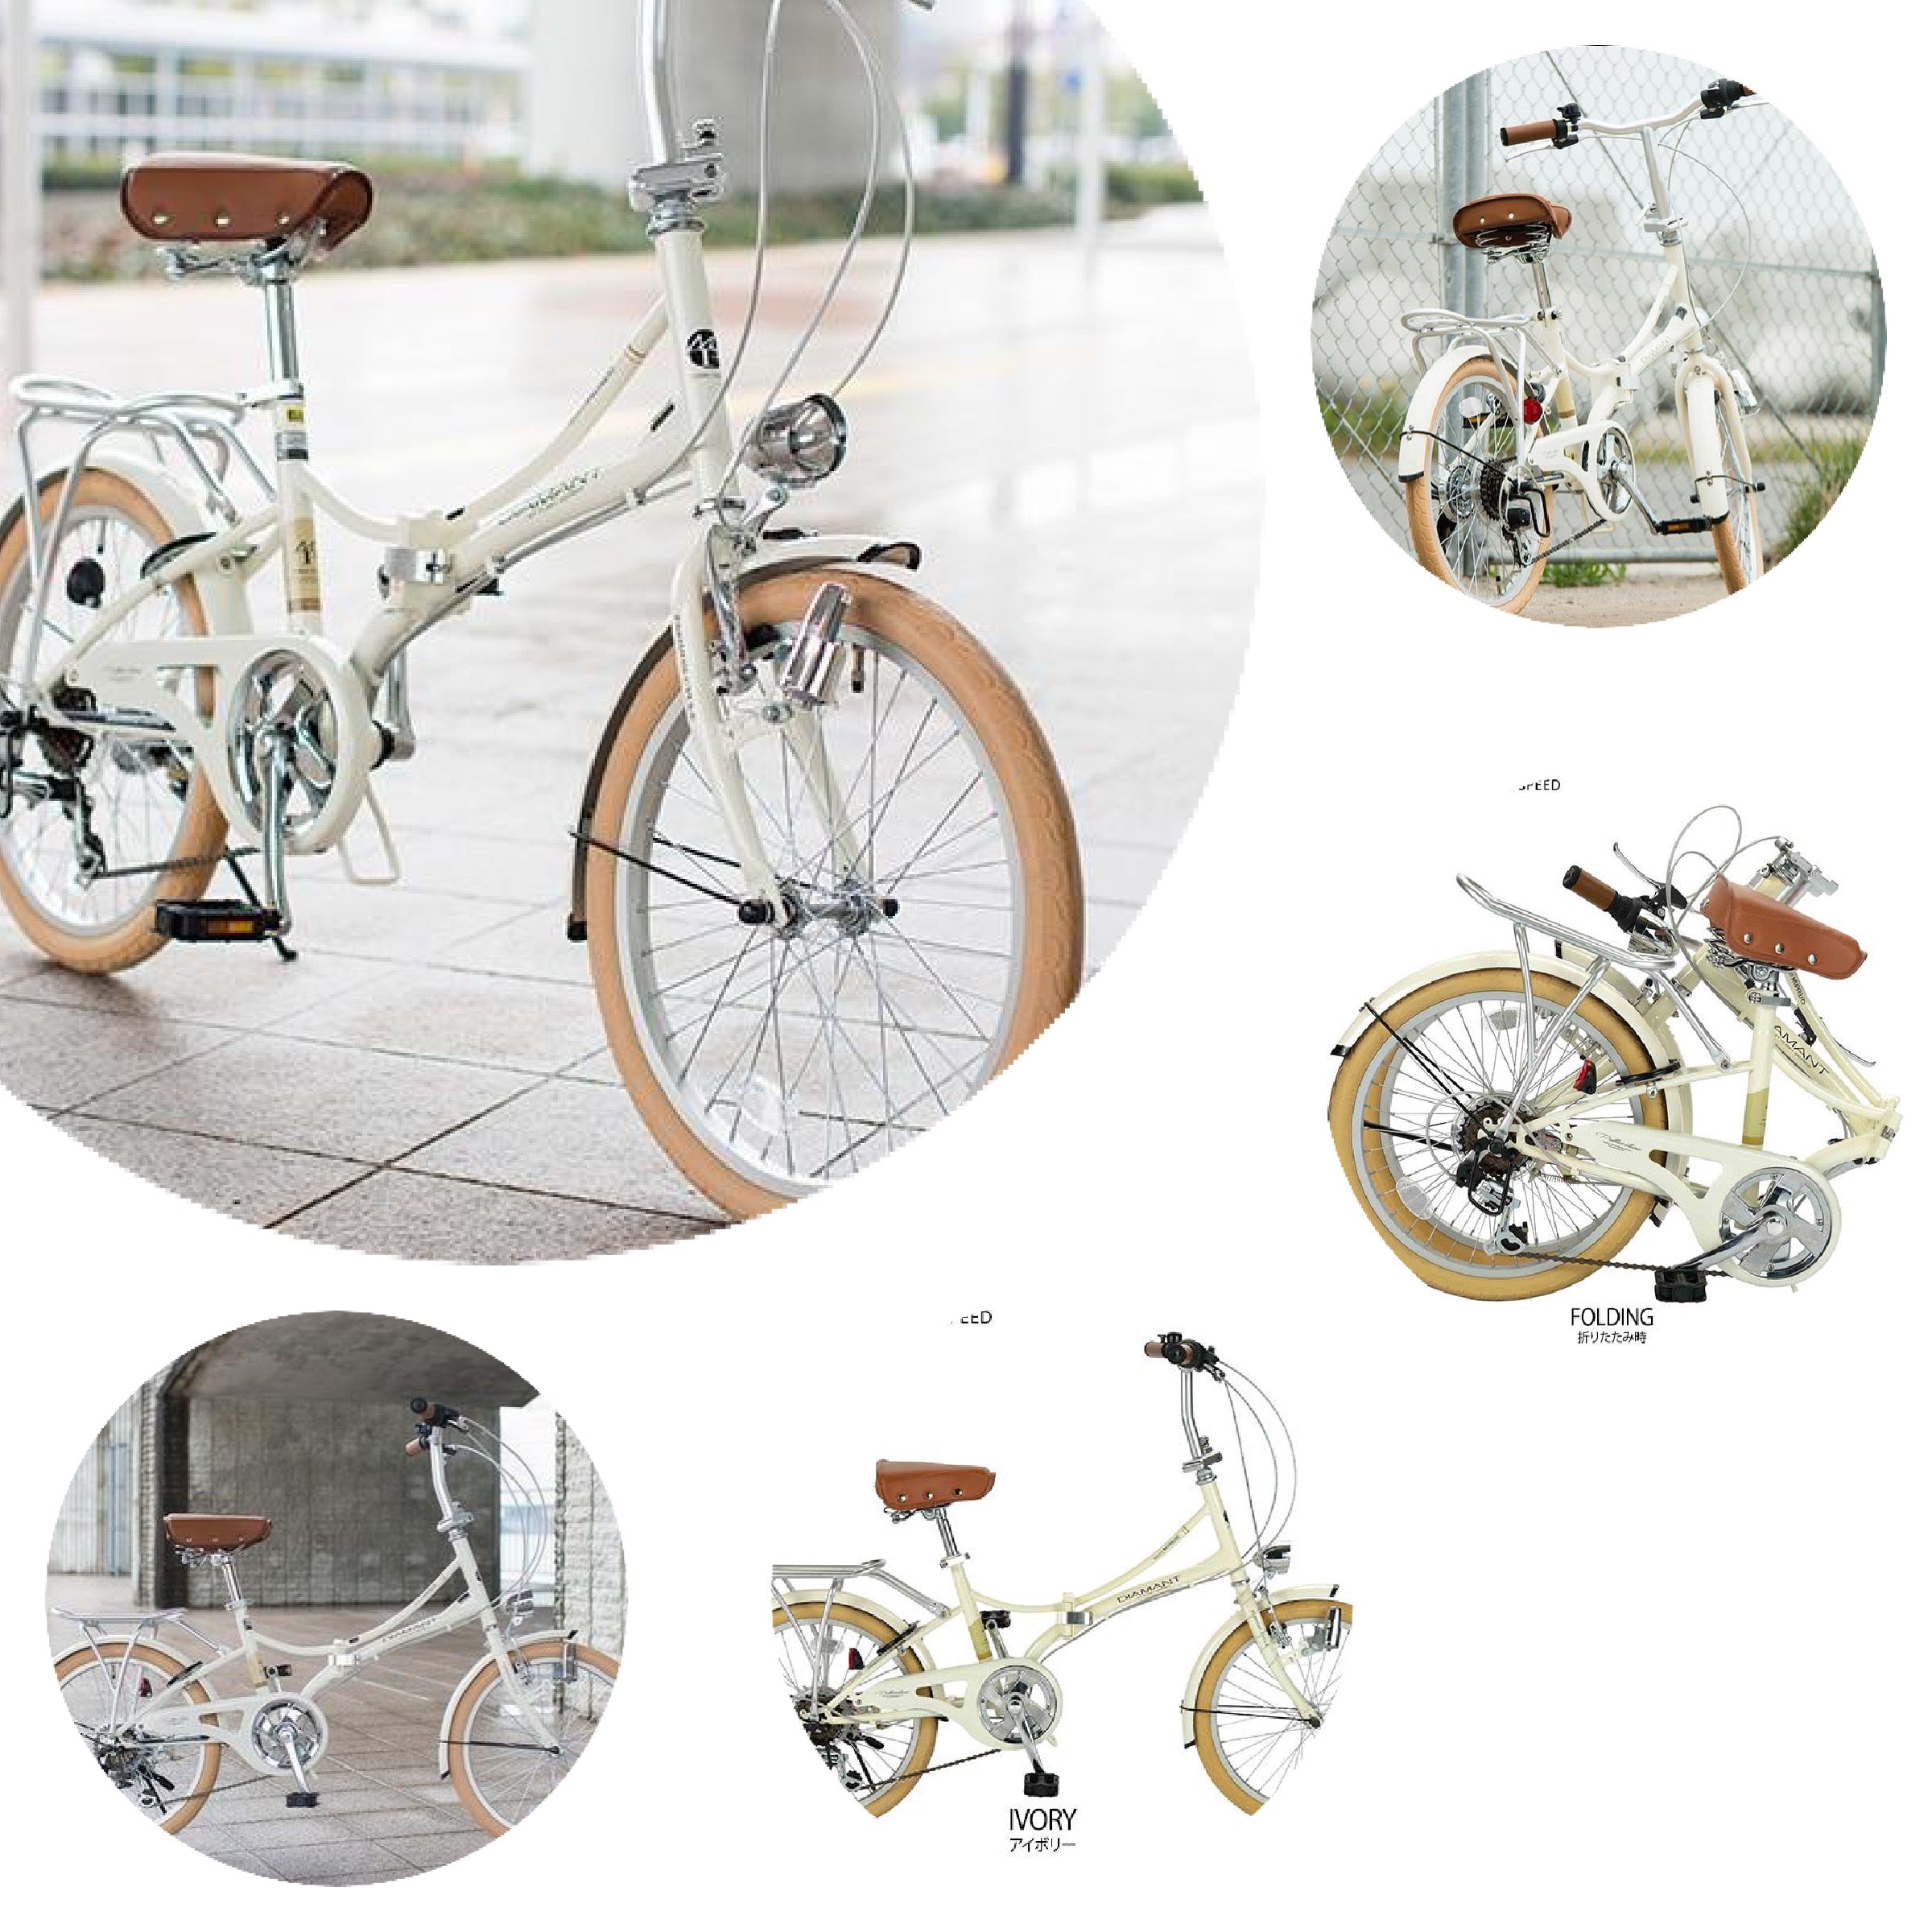 ( Available ) DIAMANT M260 FOLDABLE  20 INCH 6  SPEED BICYCLE (Free Installation With Purchase) (Available )